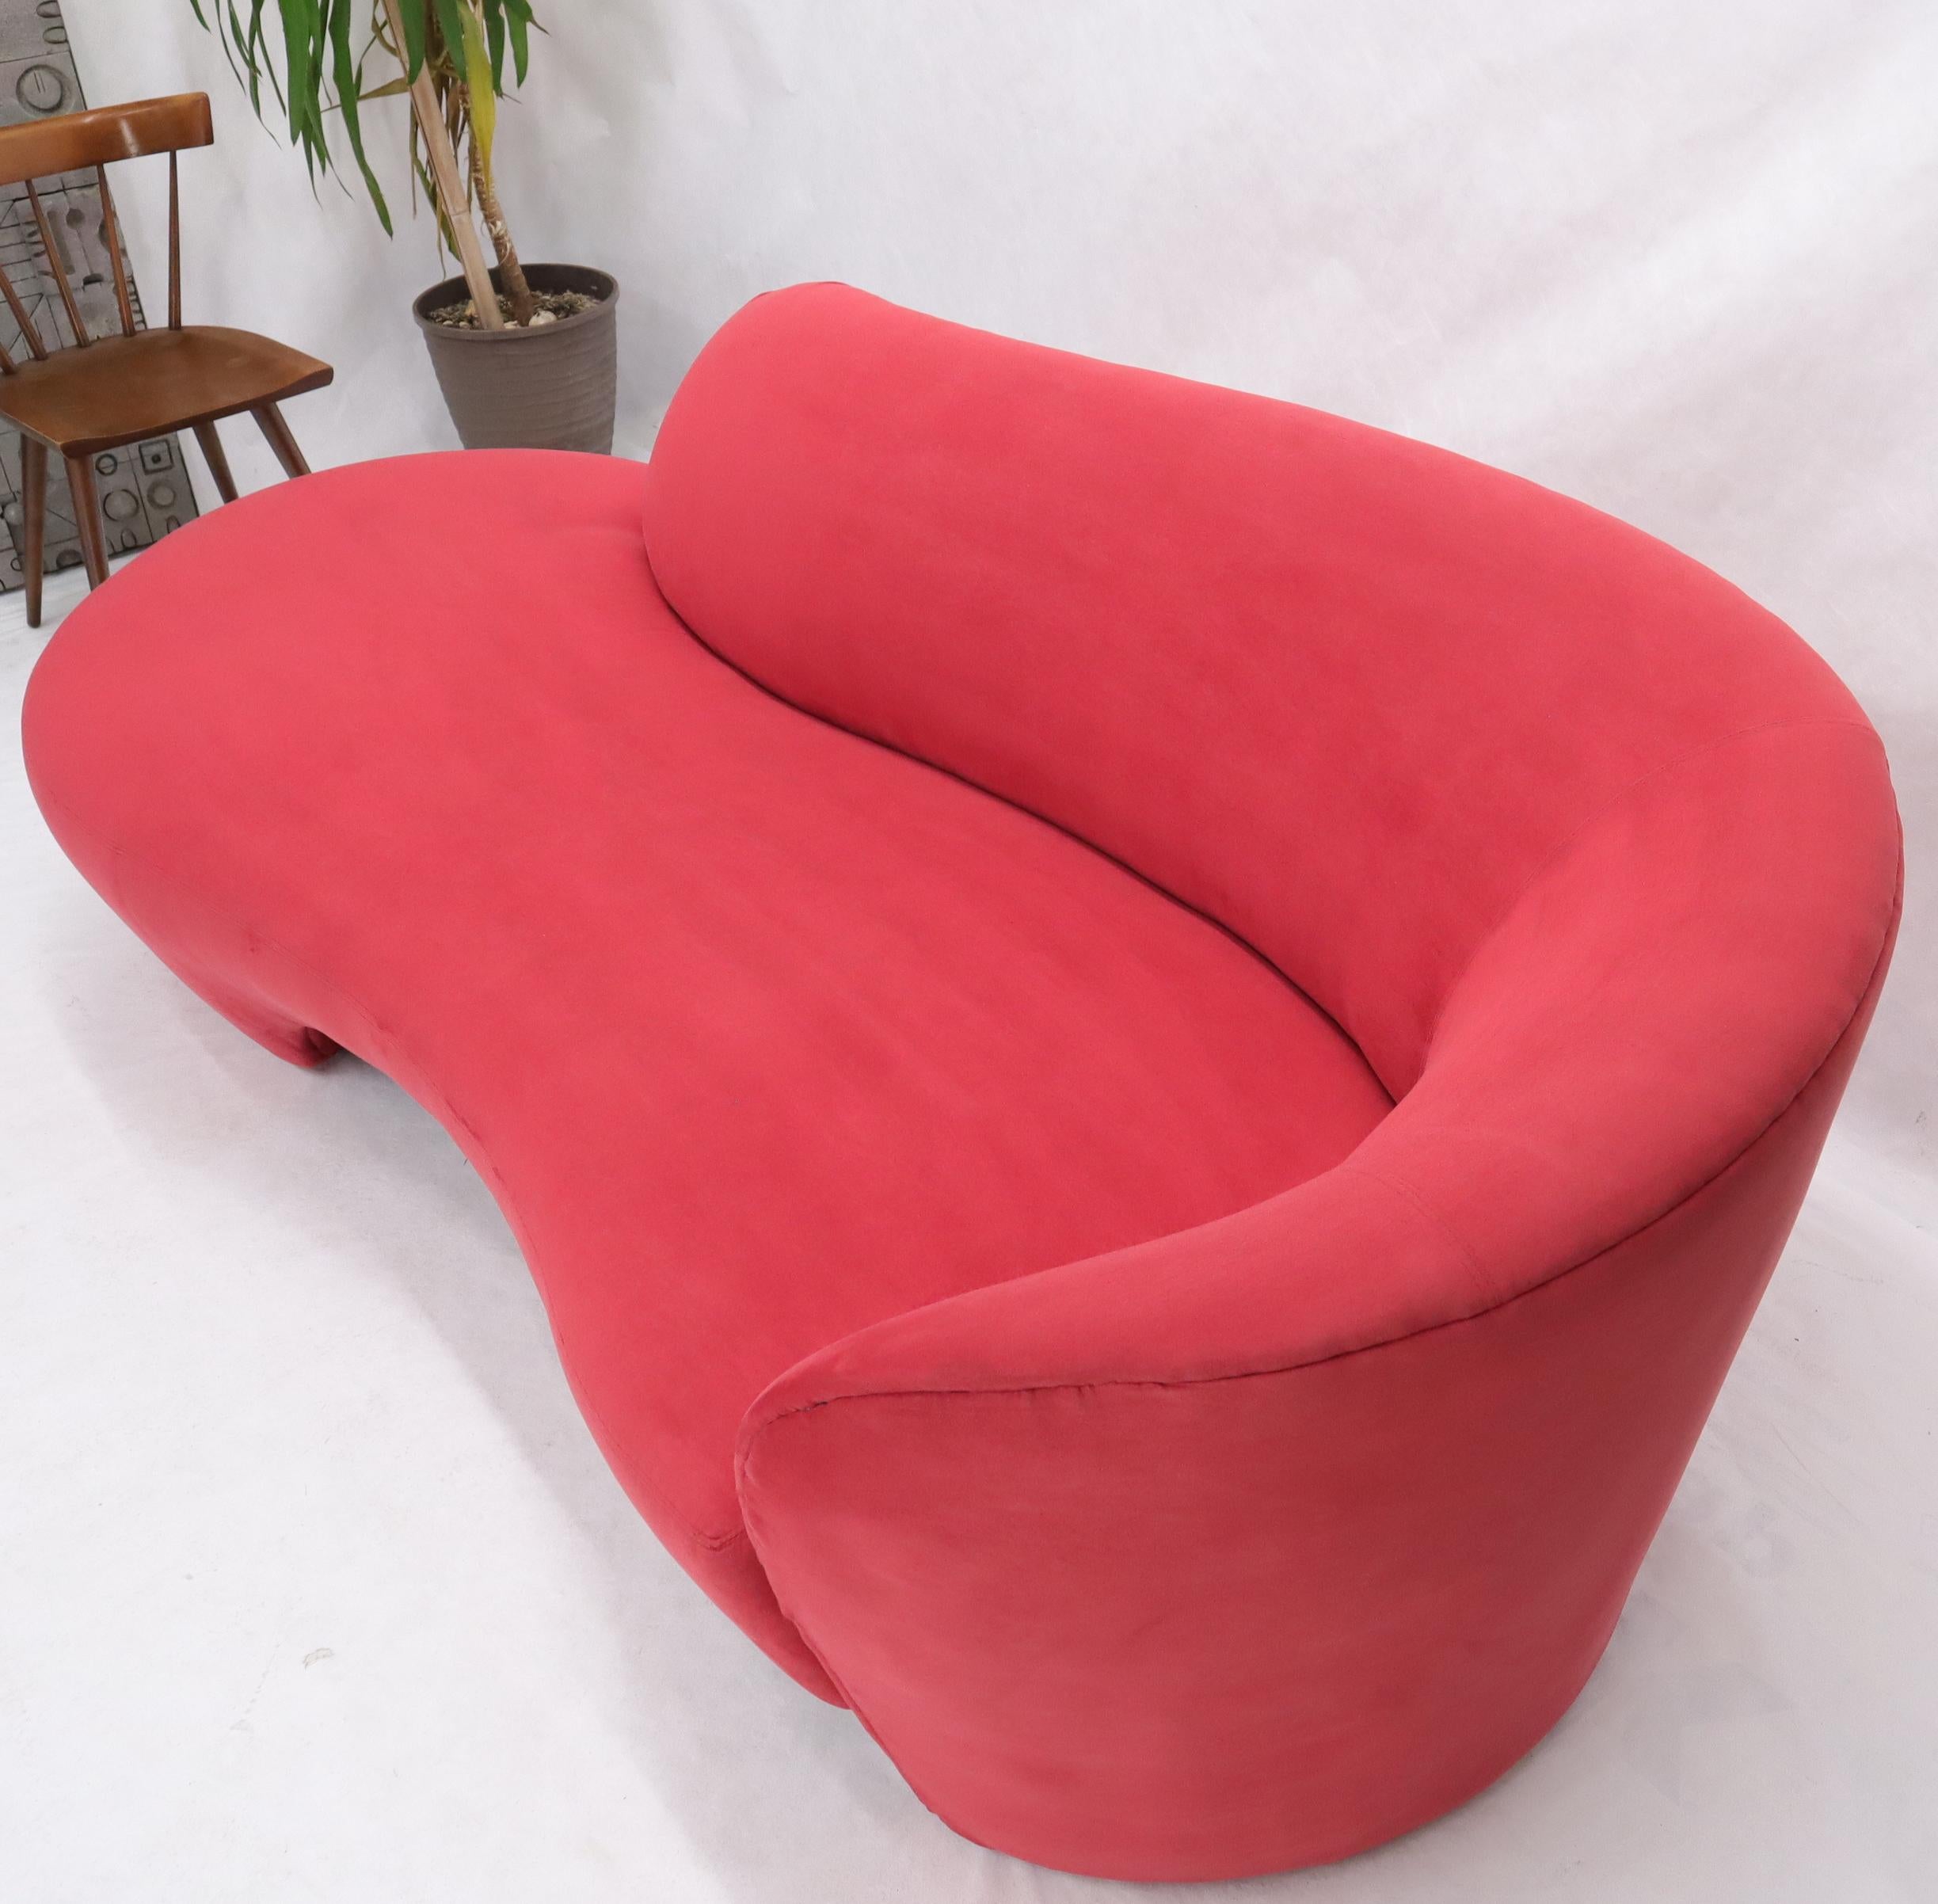 Red Suede Weiman Preview Chaise Lounge Cloud Sofa In Excellent Condition For Sale In Rockaway, NJ